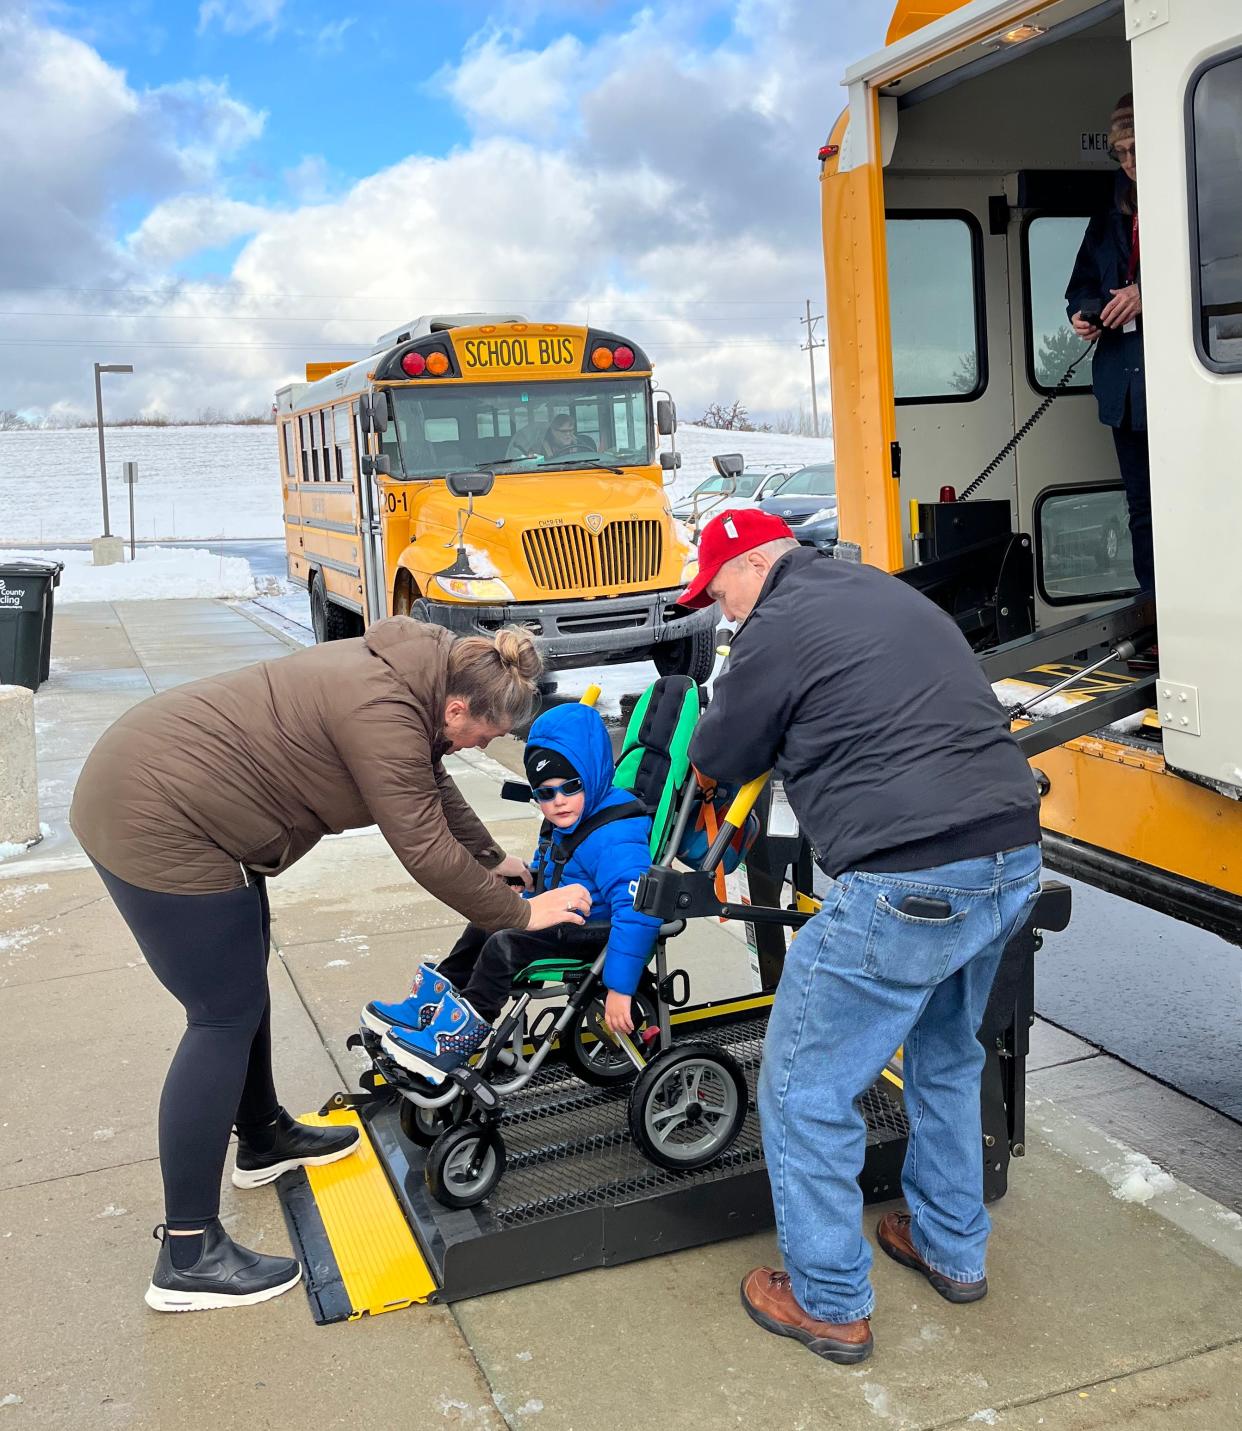 Specialized transportation and trained staff ensure students with disabilities are transported safely each school day across the Char-Em ISD region.